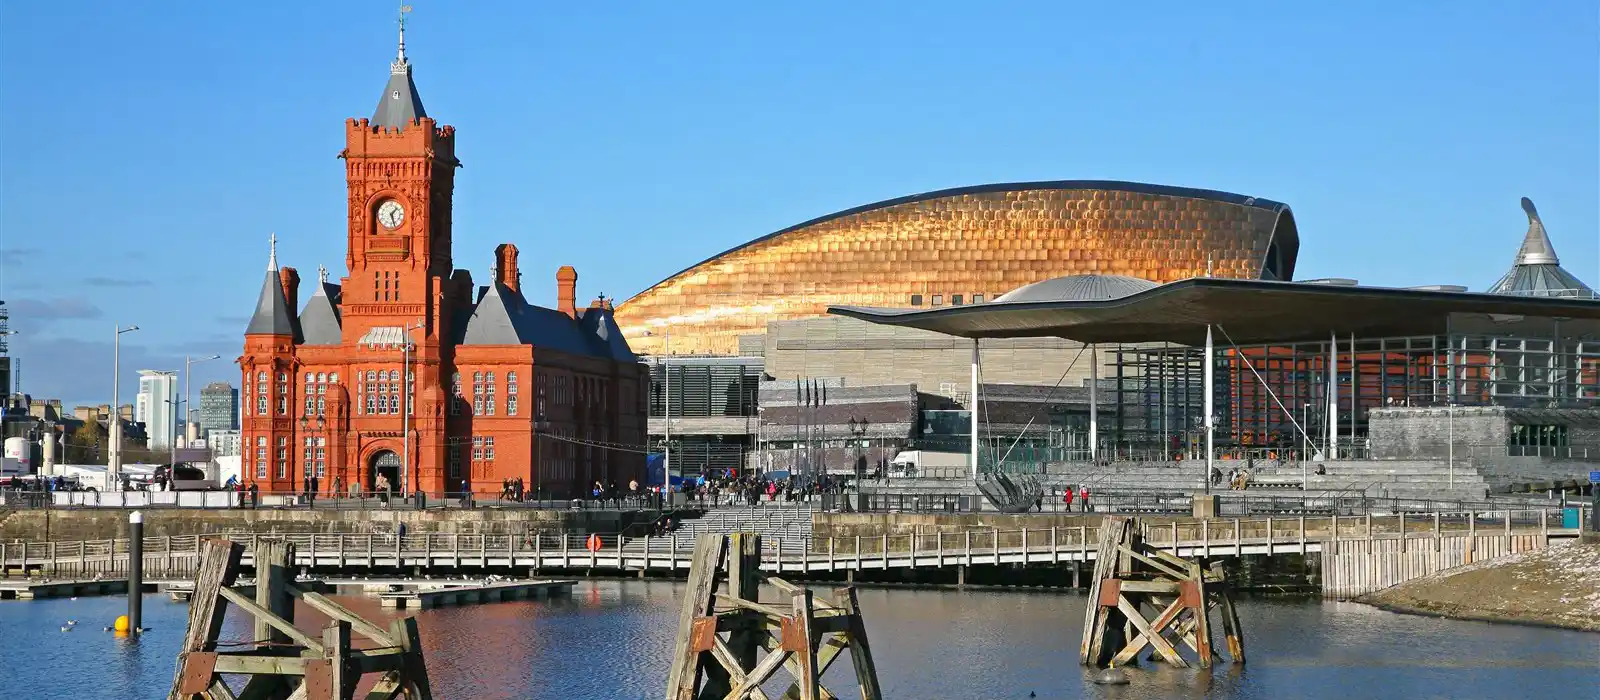 Cardiff bay, a popular Dr Who filming location